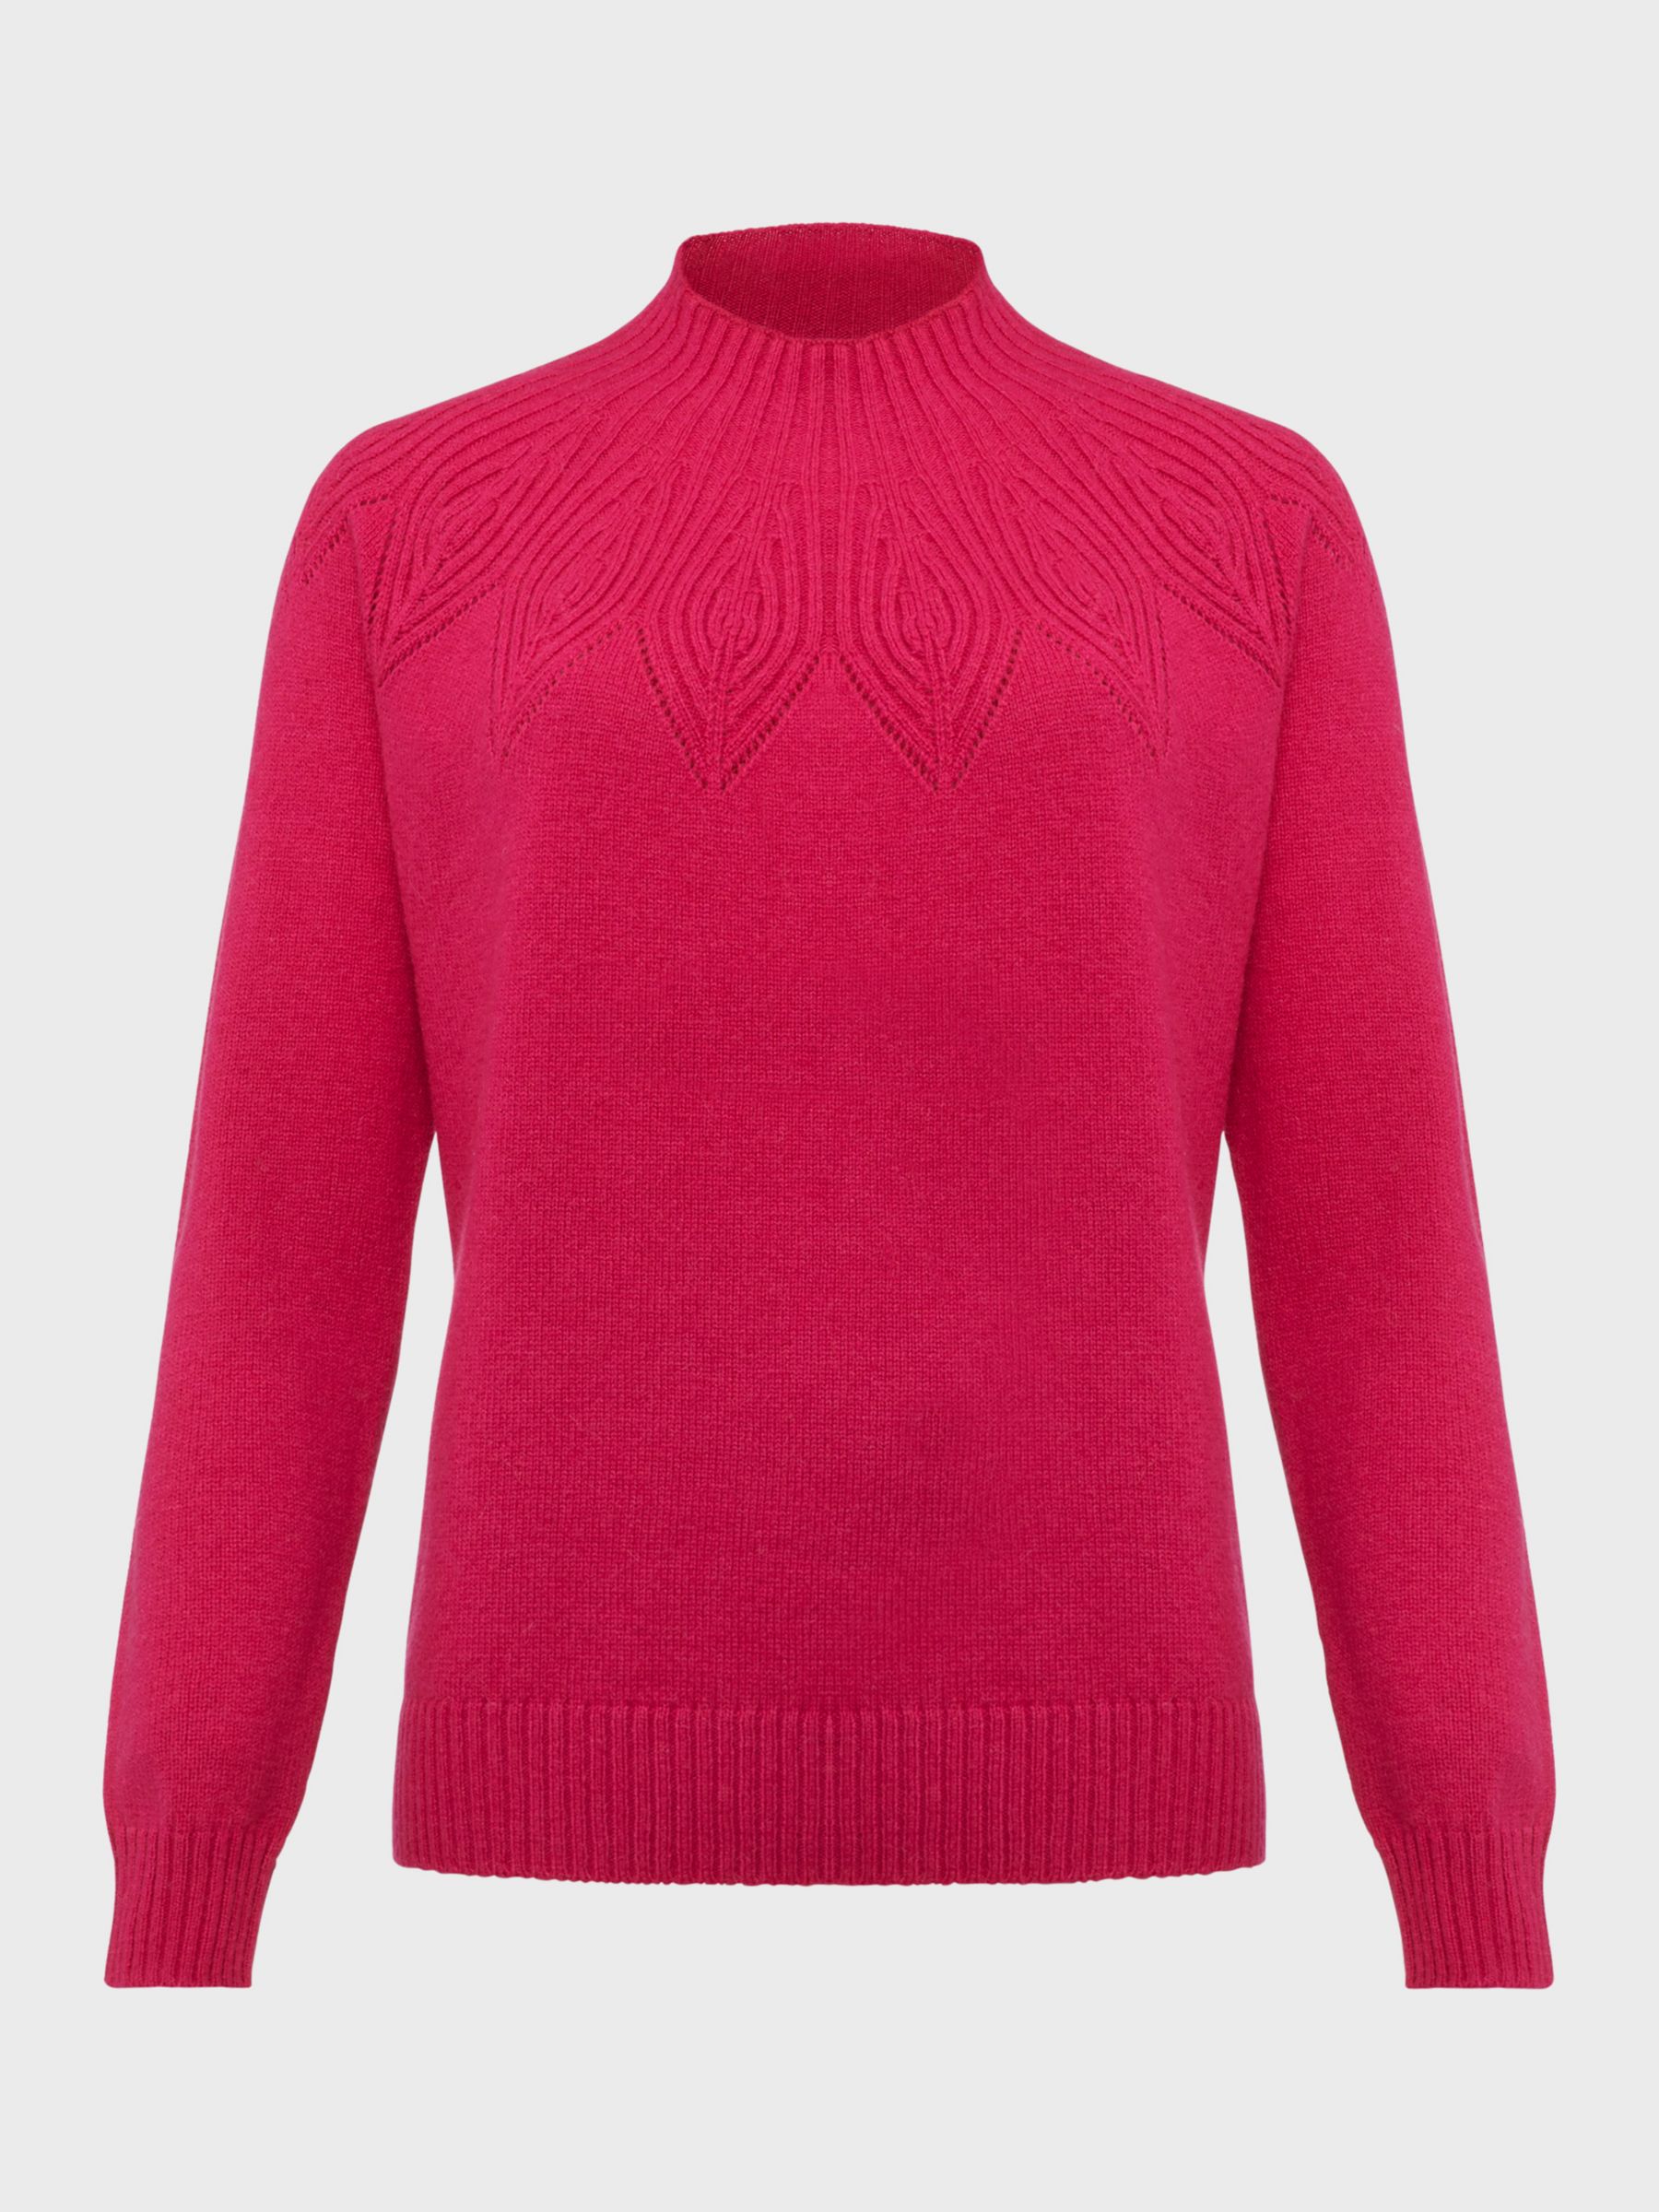 Hobbs Cecilia Pointelle Jumper, Orchid Pink